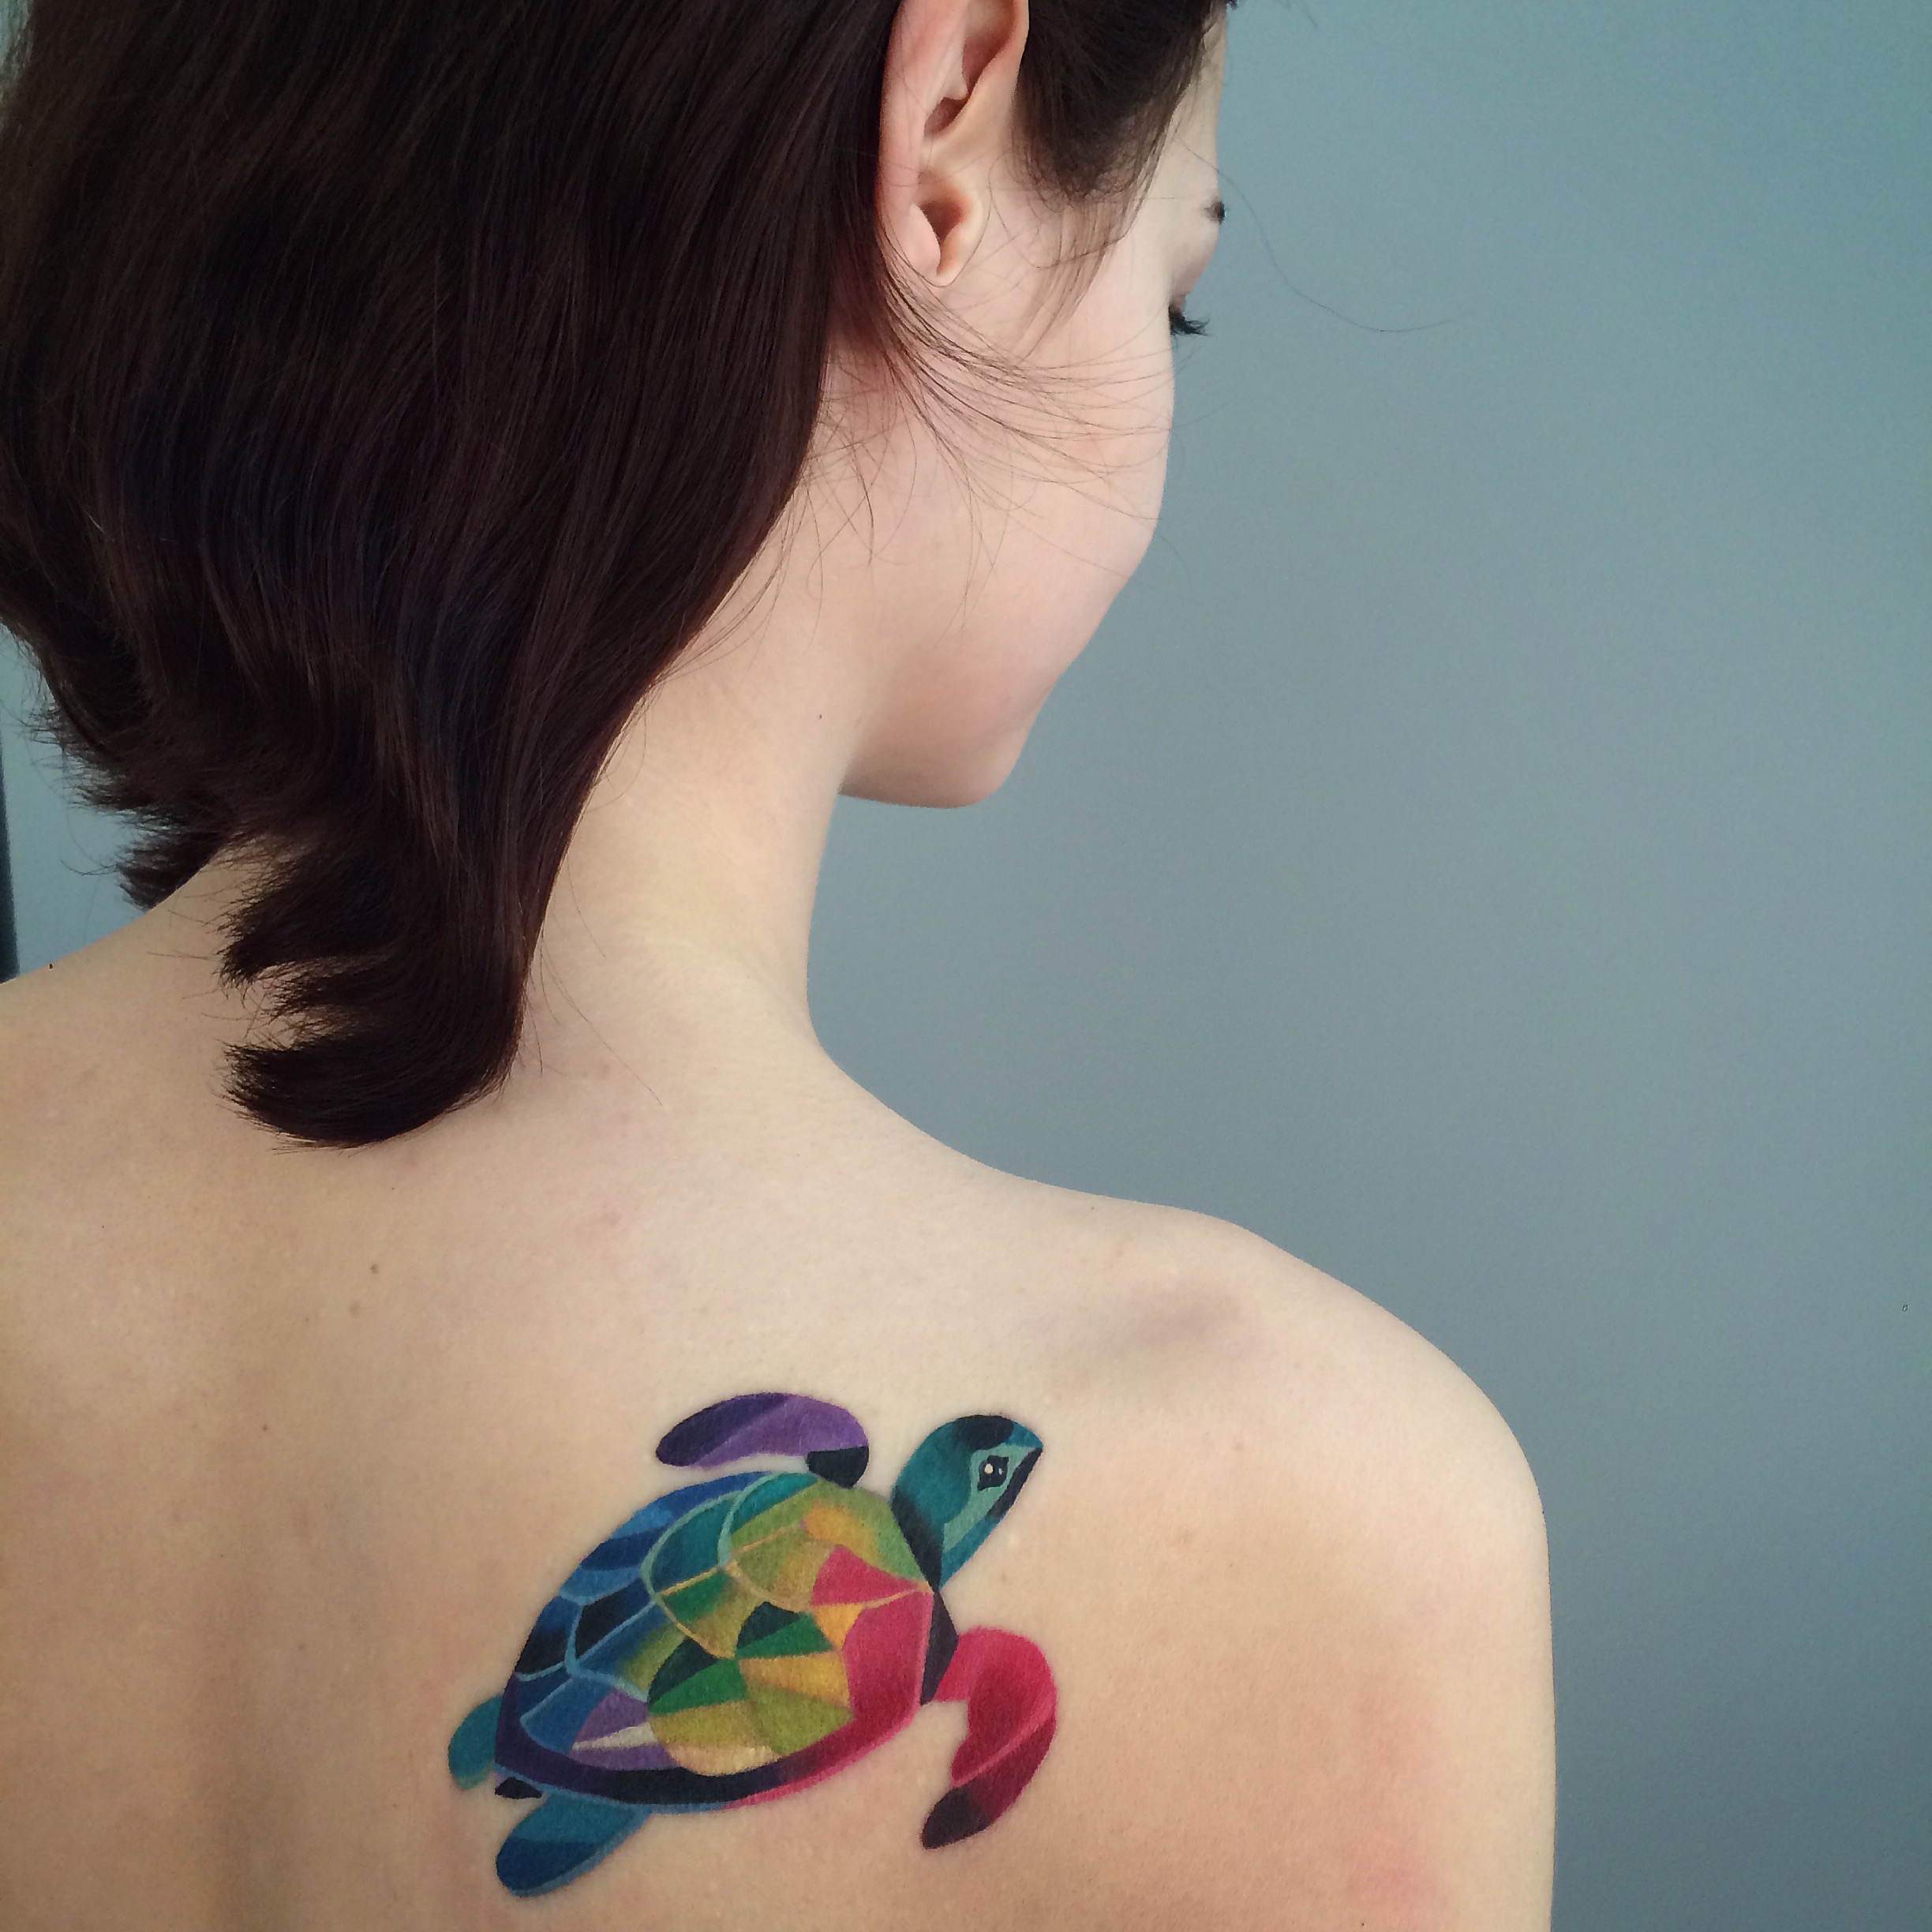 Share more than 78 unisex tattoos super hot